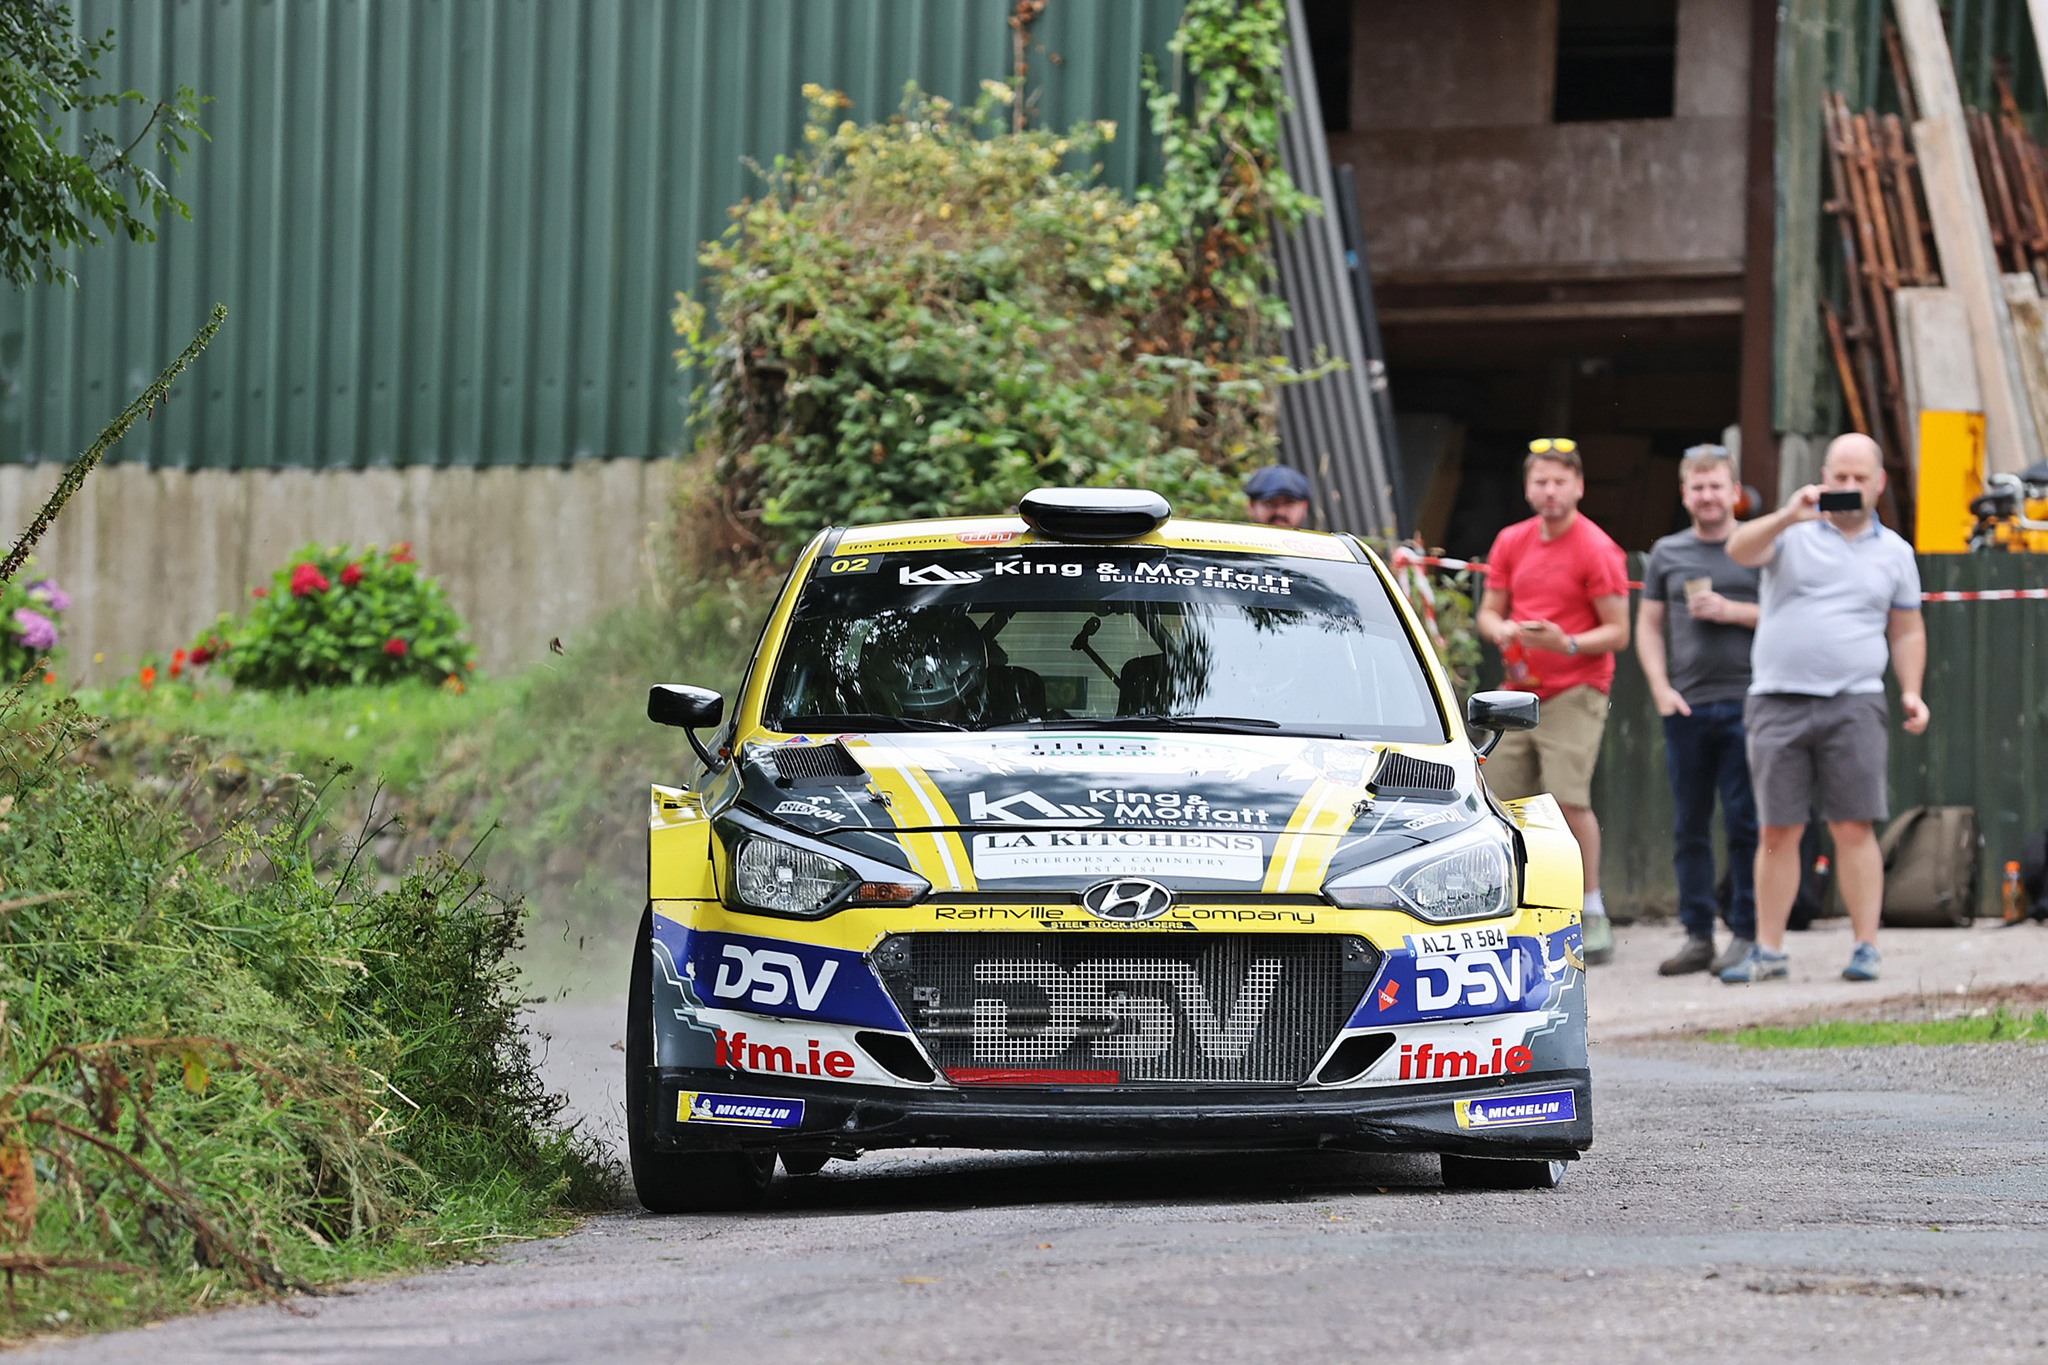 CARS AND STARS TO LOOK OUT FOR ON THE ULSTER RALLY